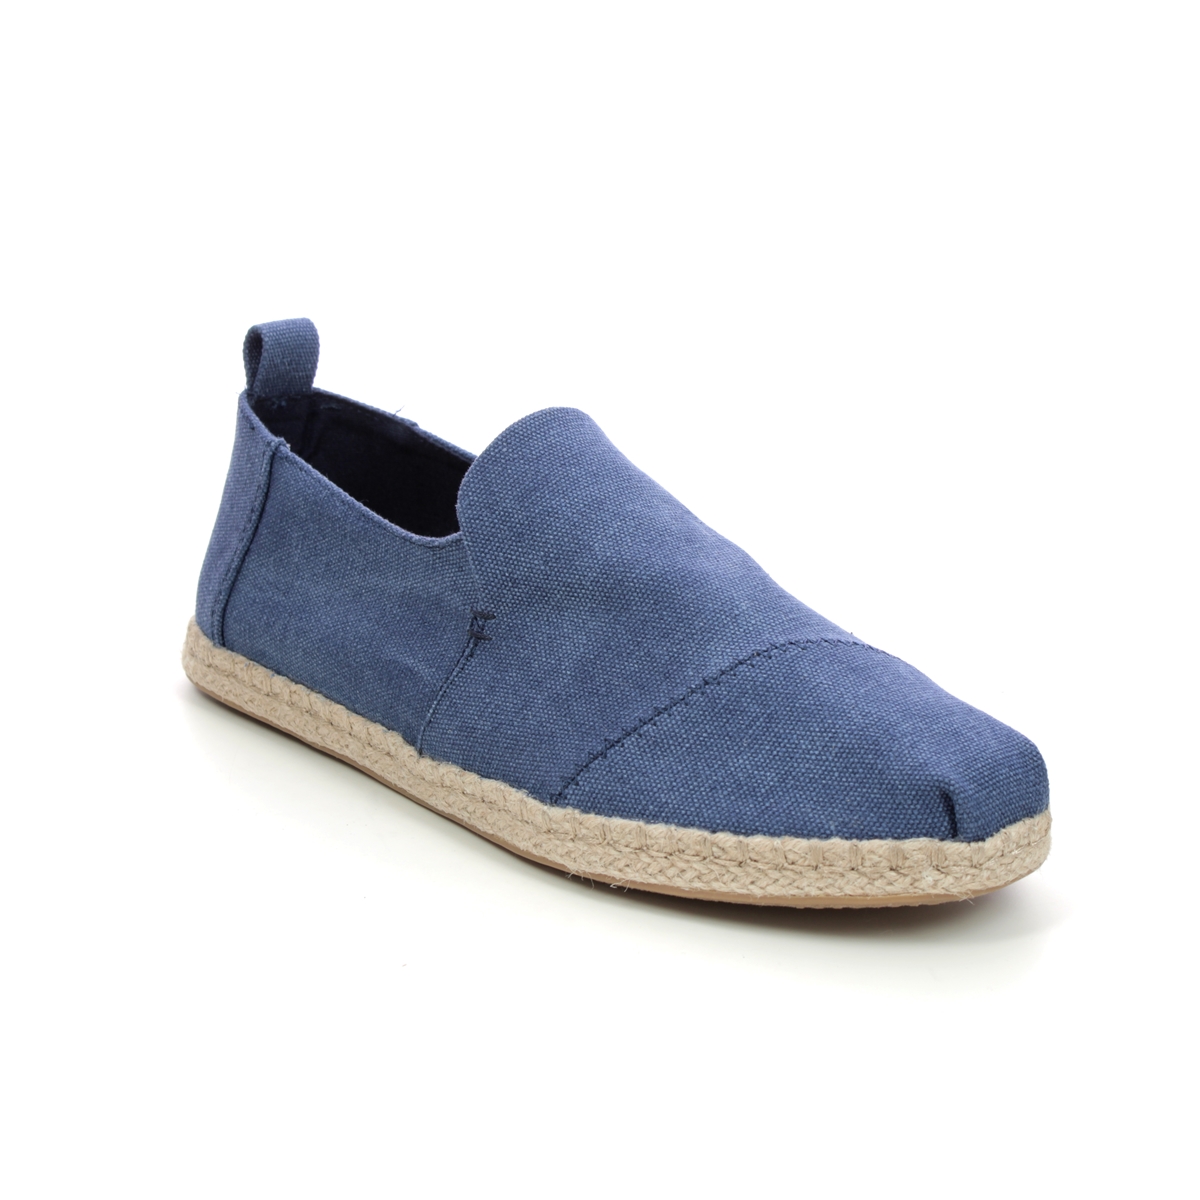 Toms Deconstructed Navy Mens Slip-on Shoes 10011623-70 in a Plain Canvas in Size 8